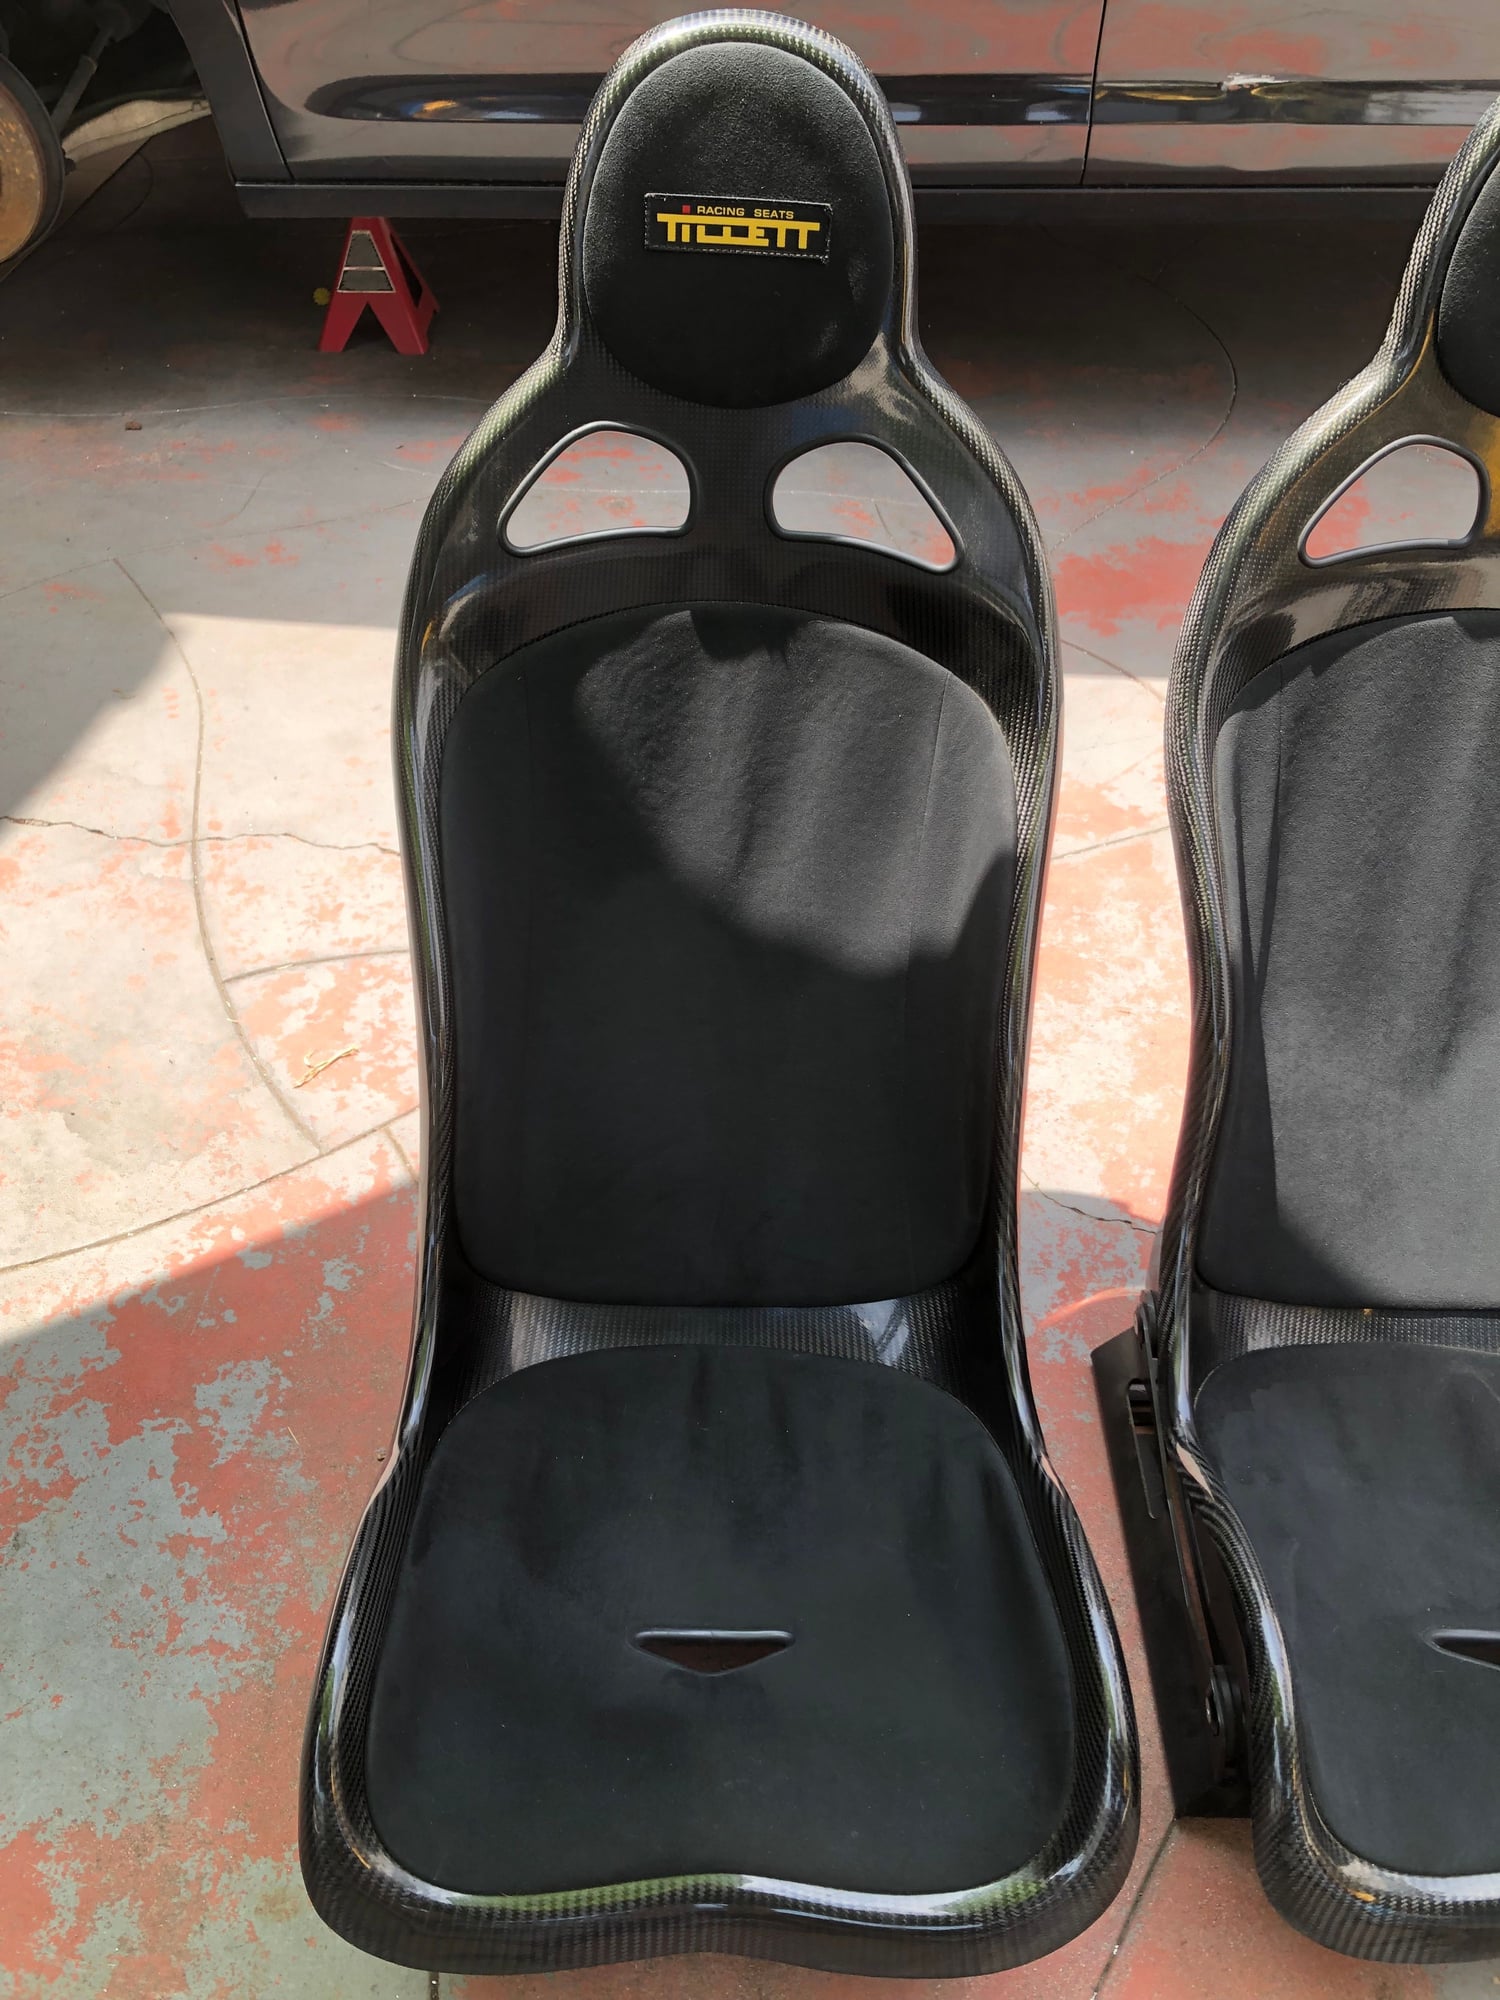 Interior/Upholstery - Pair of Tillett B1 full carbon fiber seats with brackets and pads - Used - All Years Any Make All Models - Lakewood, CA 90712, United States